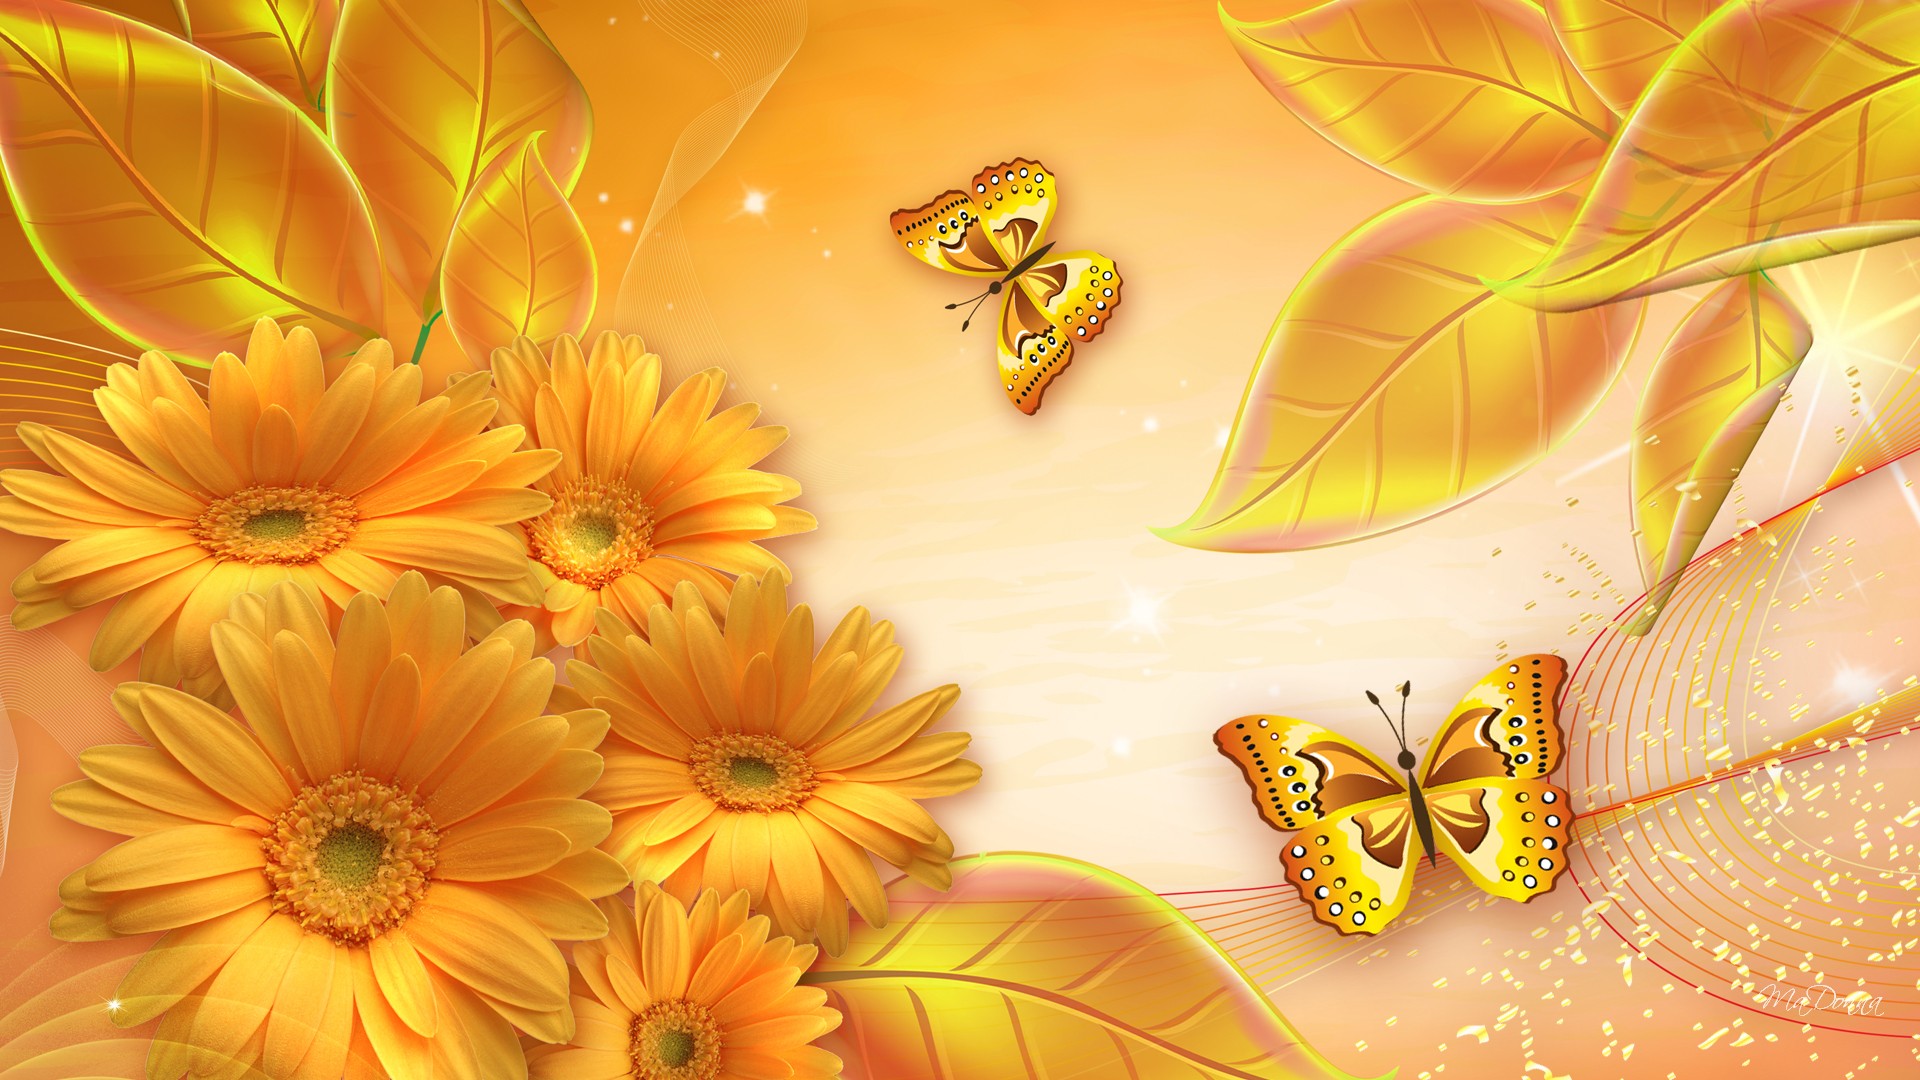 Flowers Gold Awesome Wallpaper 1920x1080